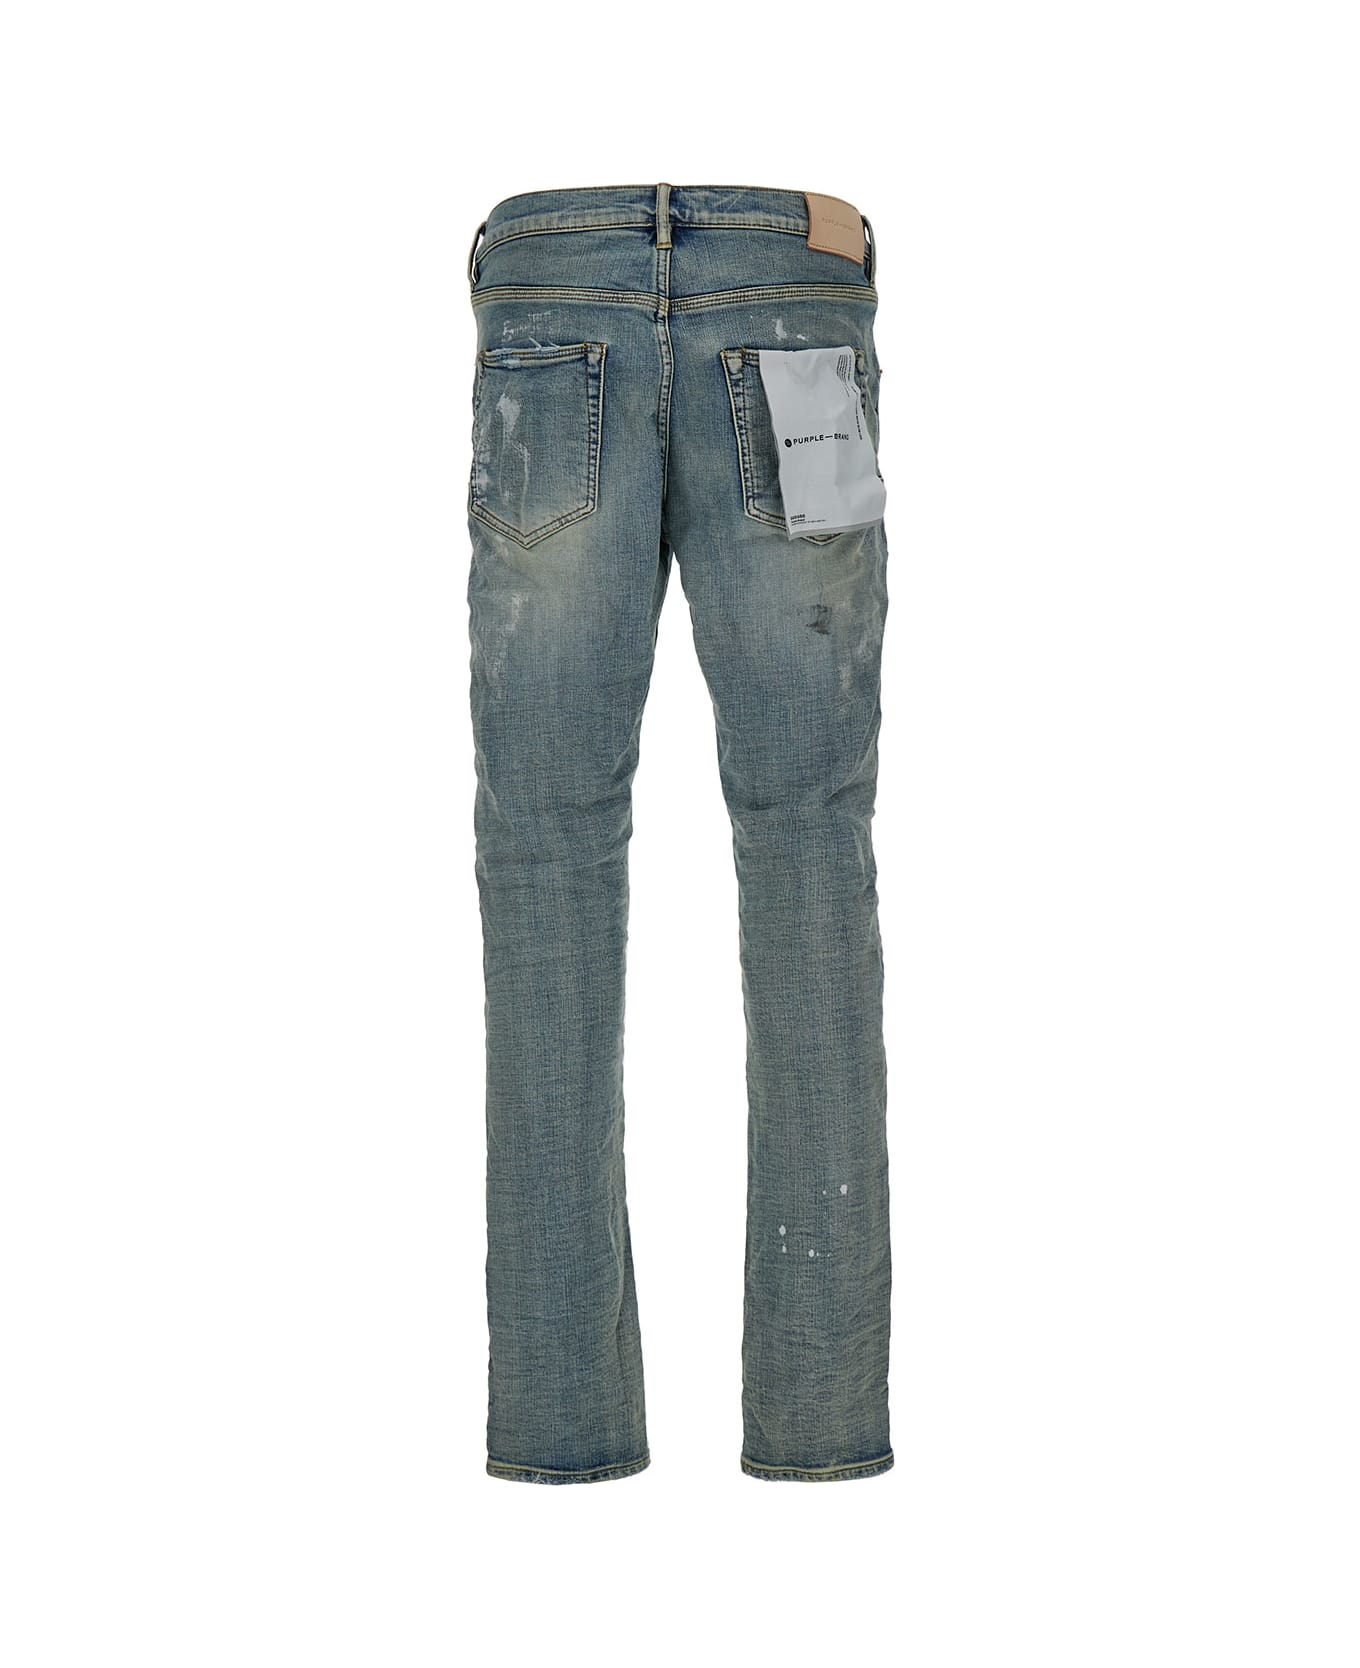 Purple Brand Light bolt Five Pockets Skinny Jeans With Paint Stains In Cotton Denim Man - Light bolt